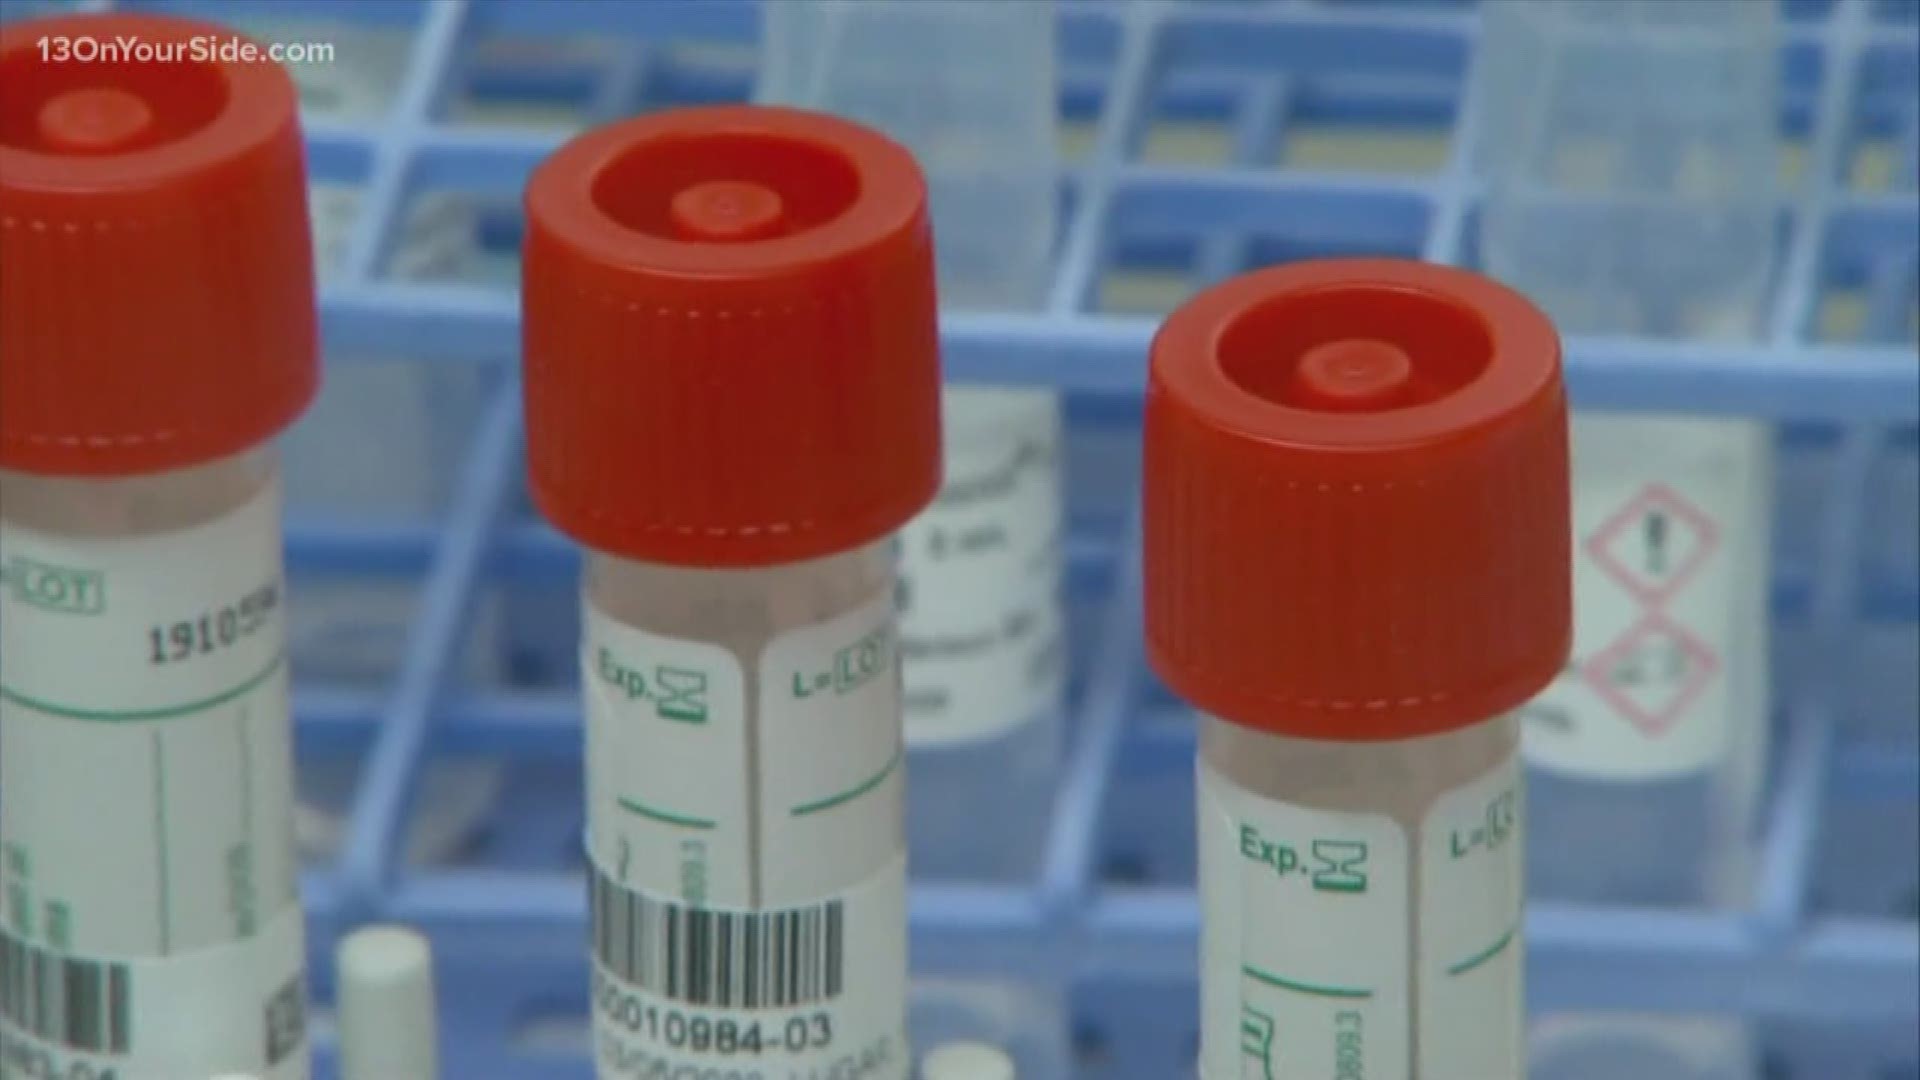 All across the country, state health officials say they don't have enough COVID-19 test kits. West Michigan officials say they have enough for the time being.